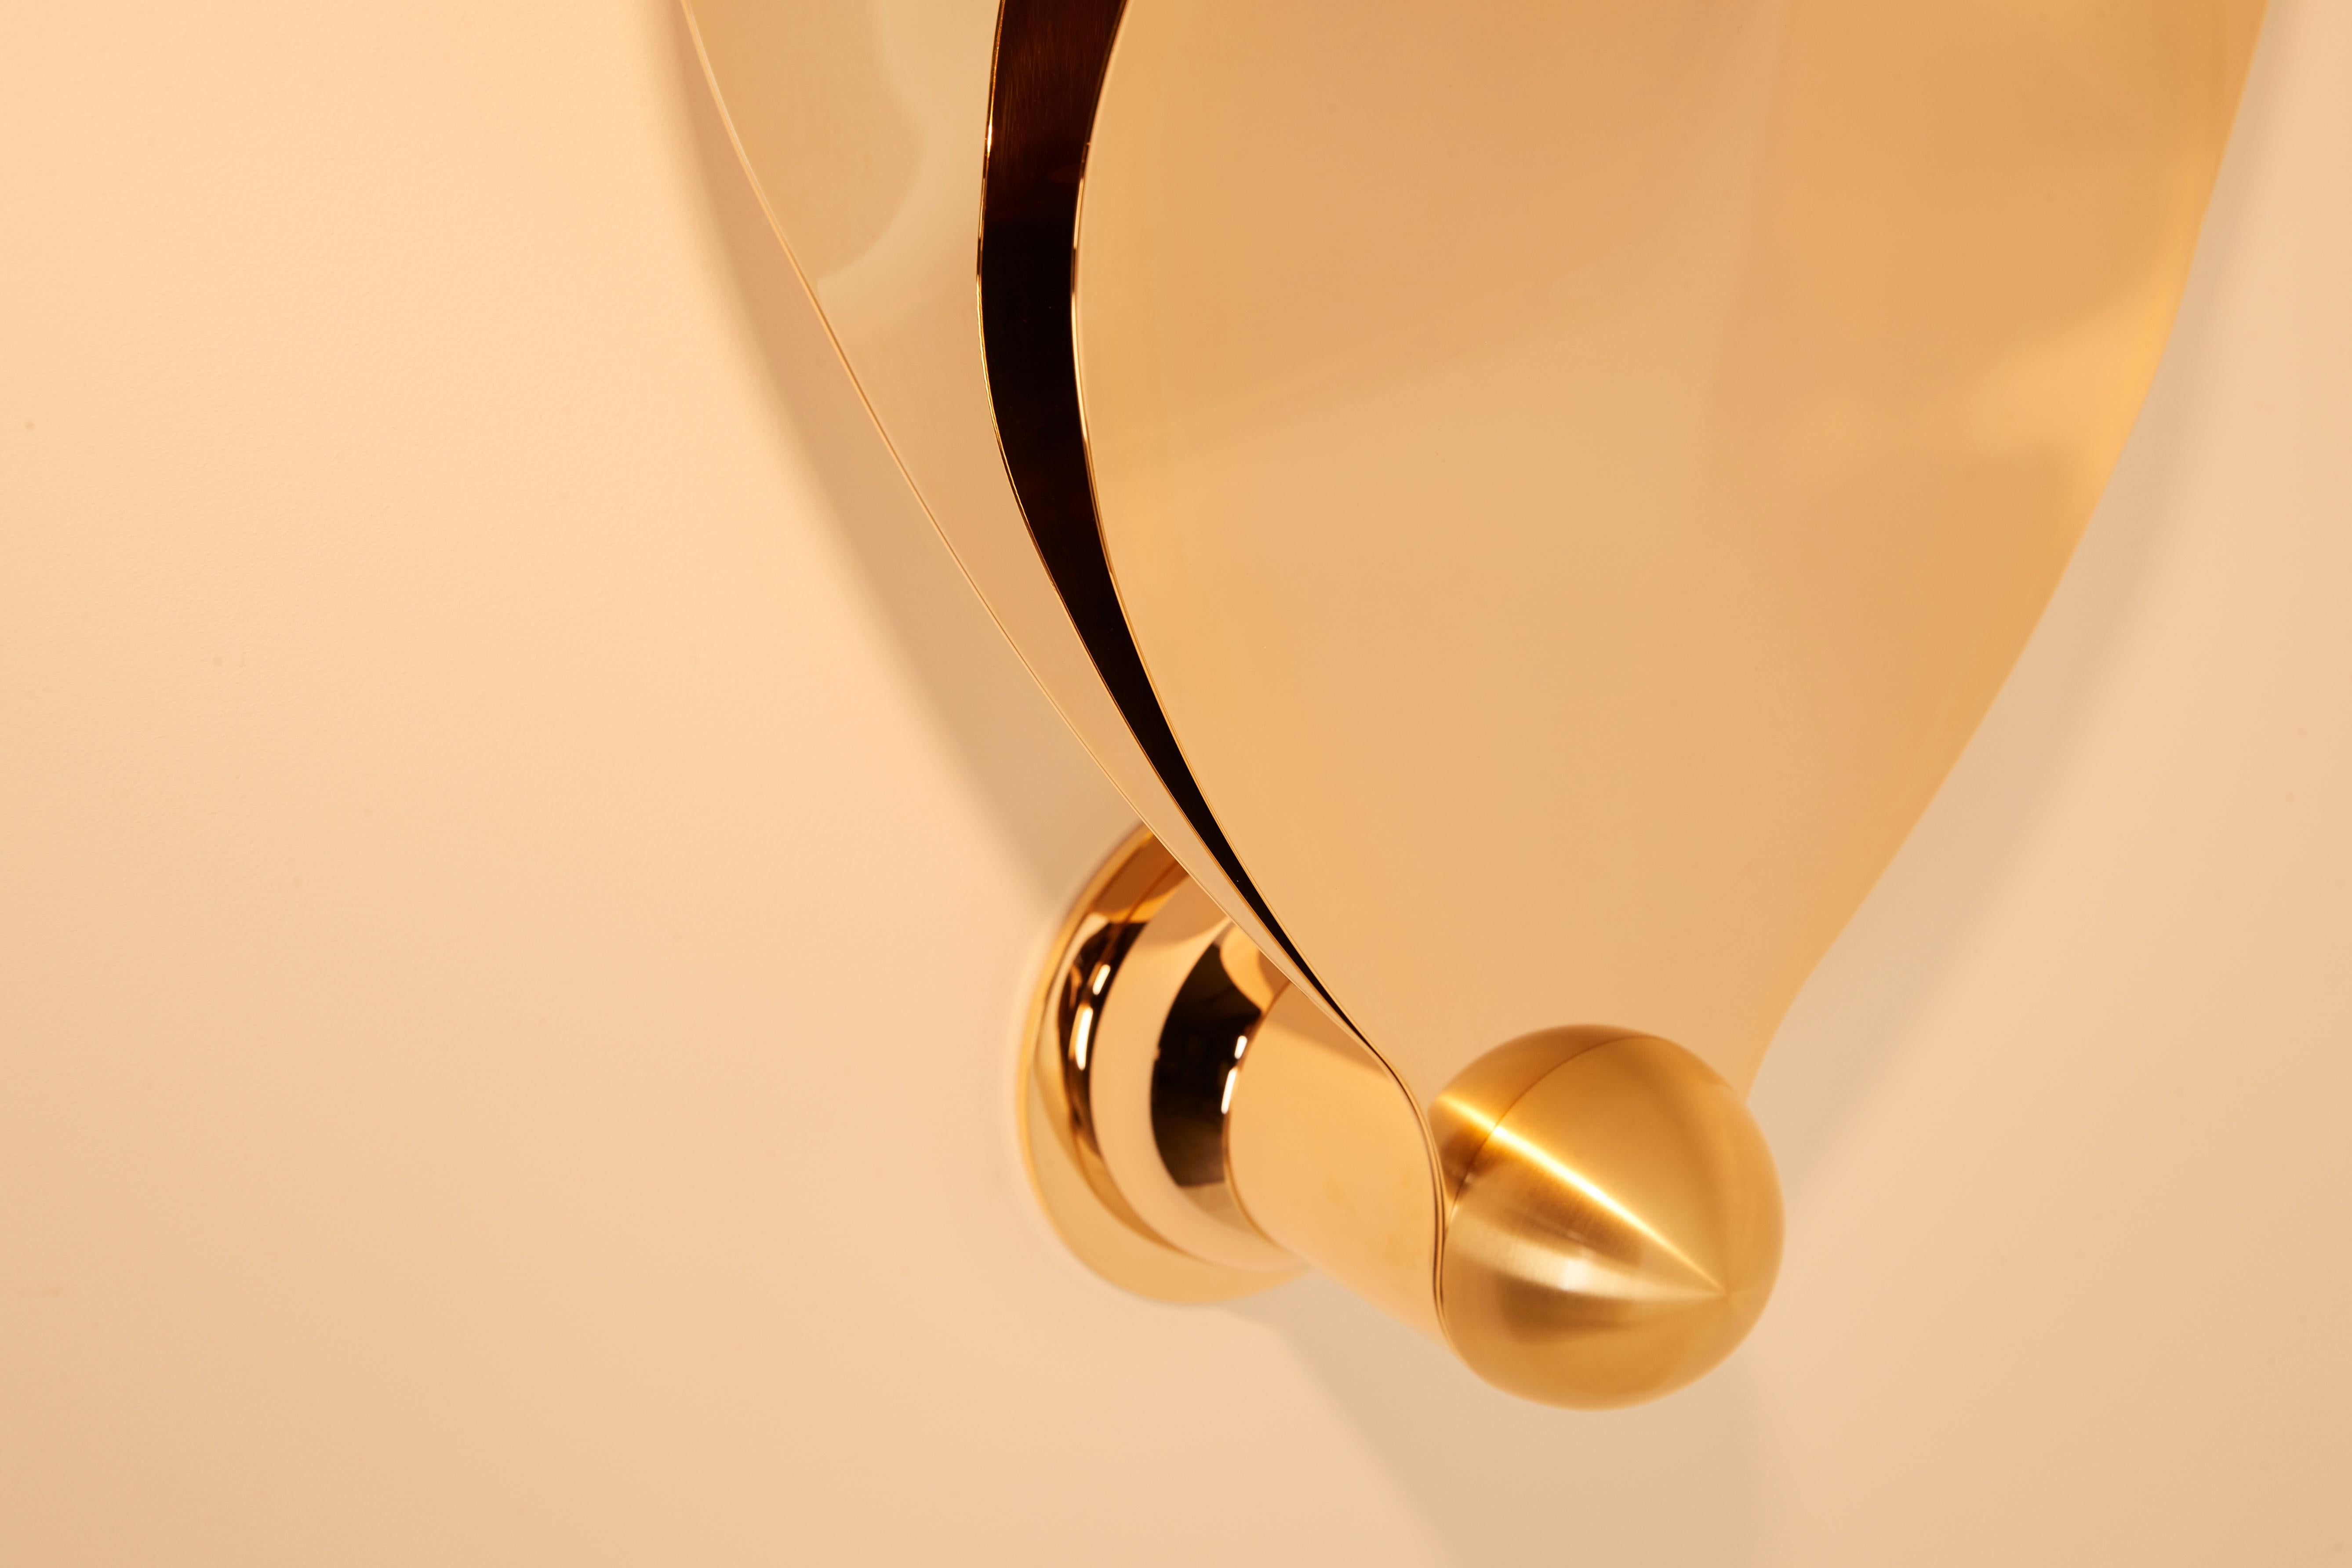 Brass Flame Wall Lamp by Mydriaz For Sale